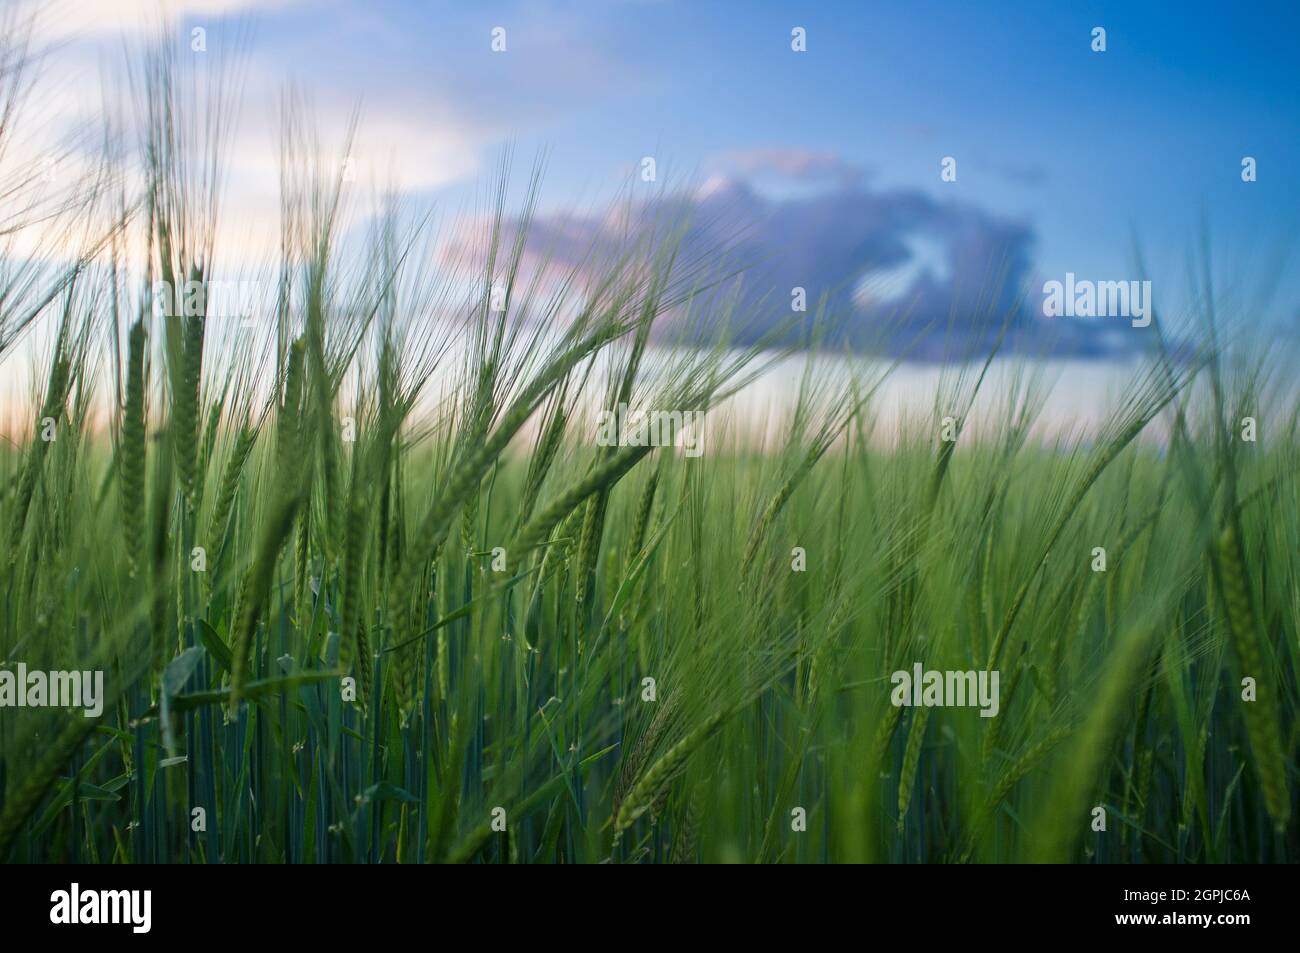 Green barley ears full of grains at cereal field over cloudy sunset sky. Low angle view Stock Photo